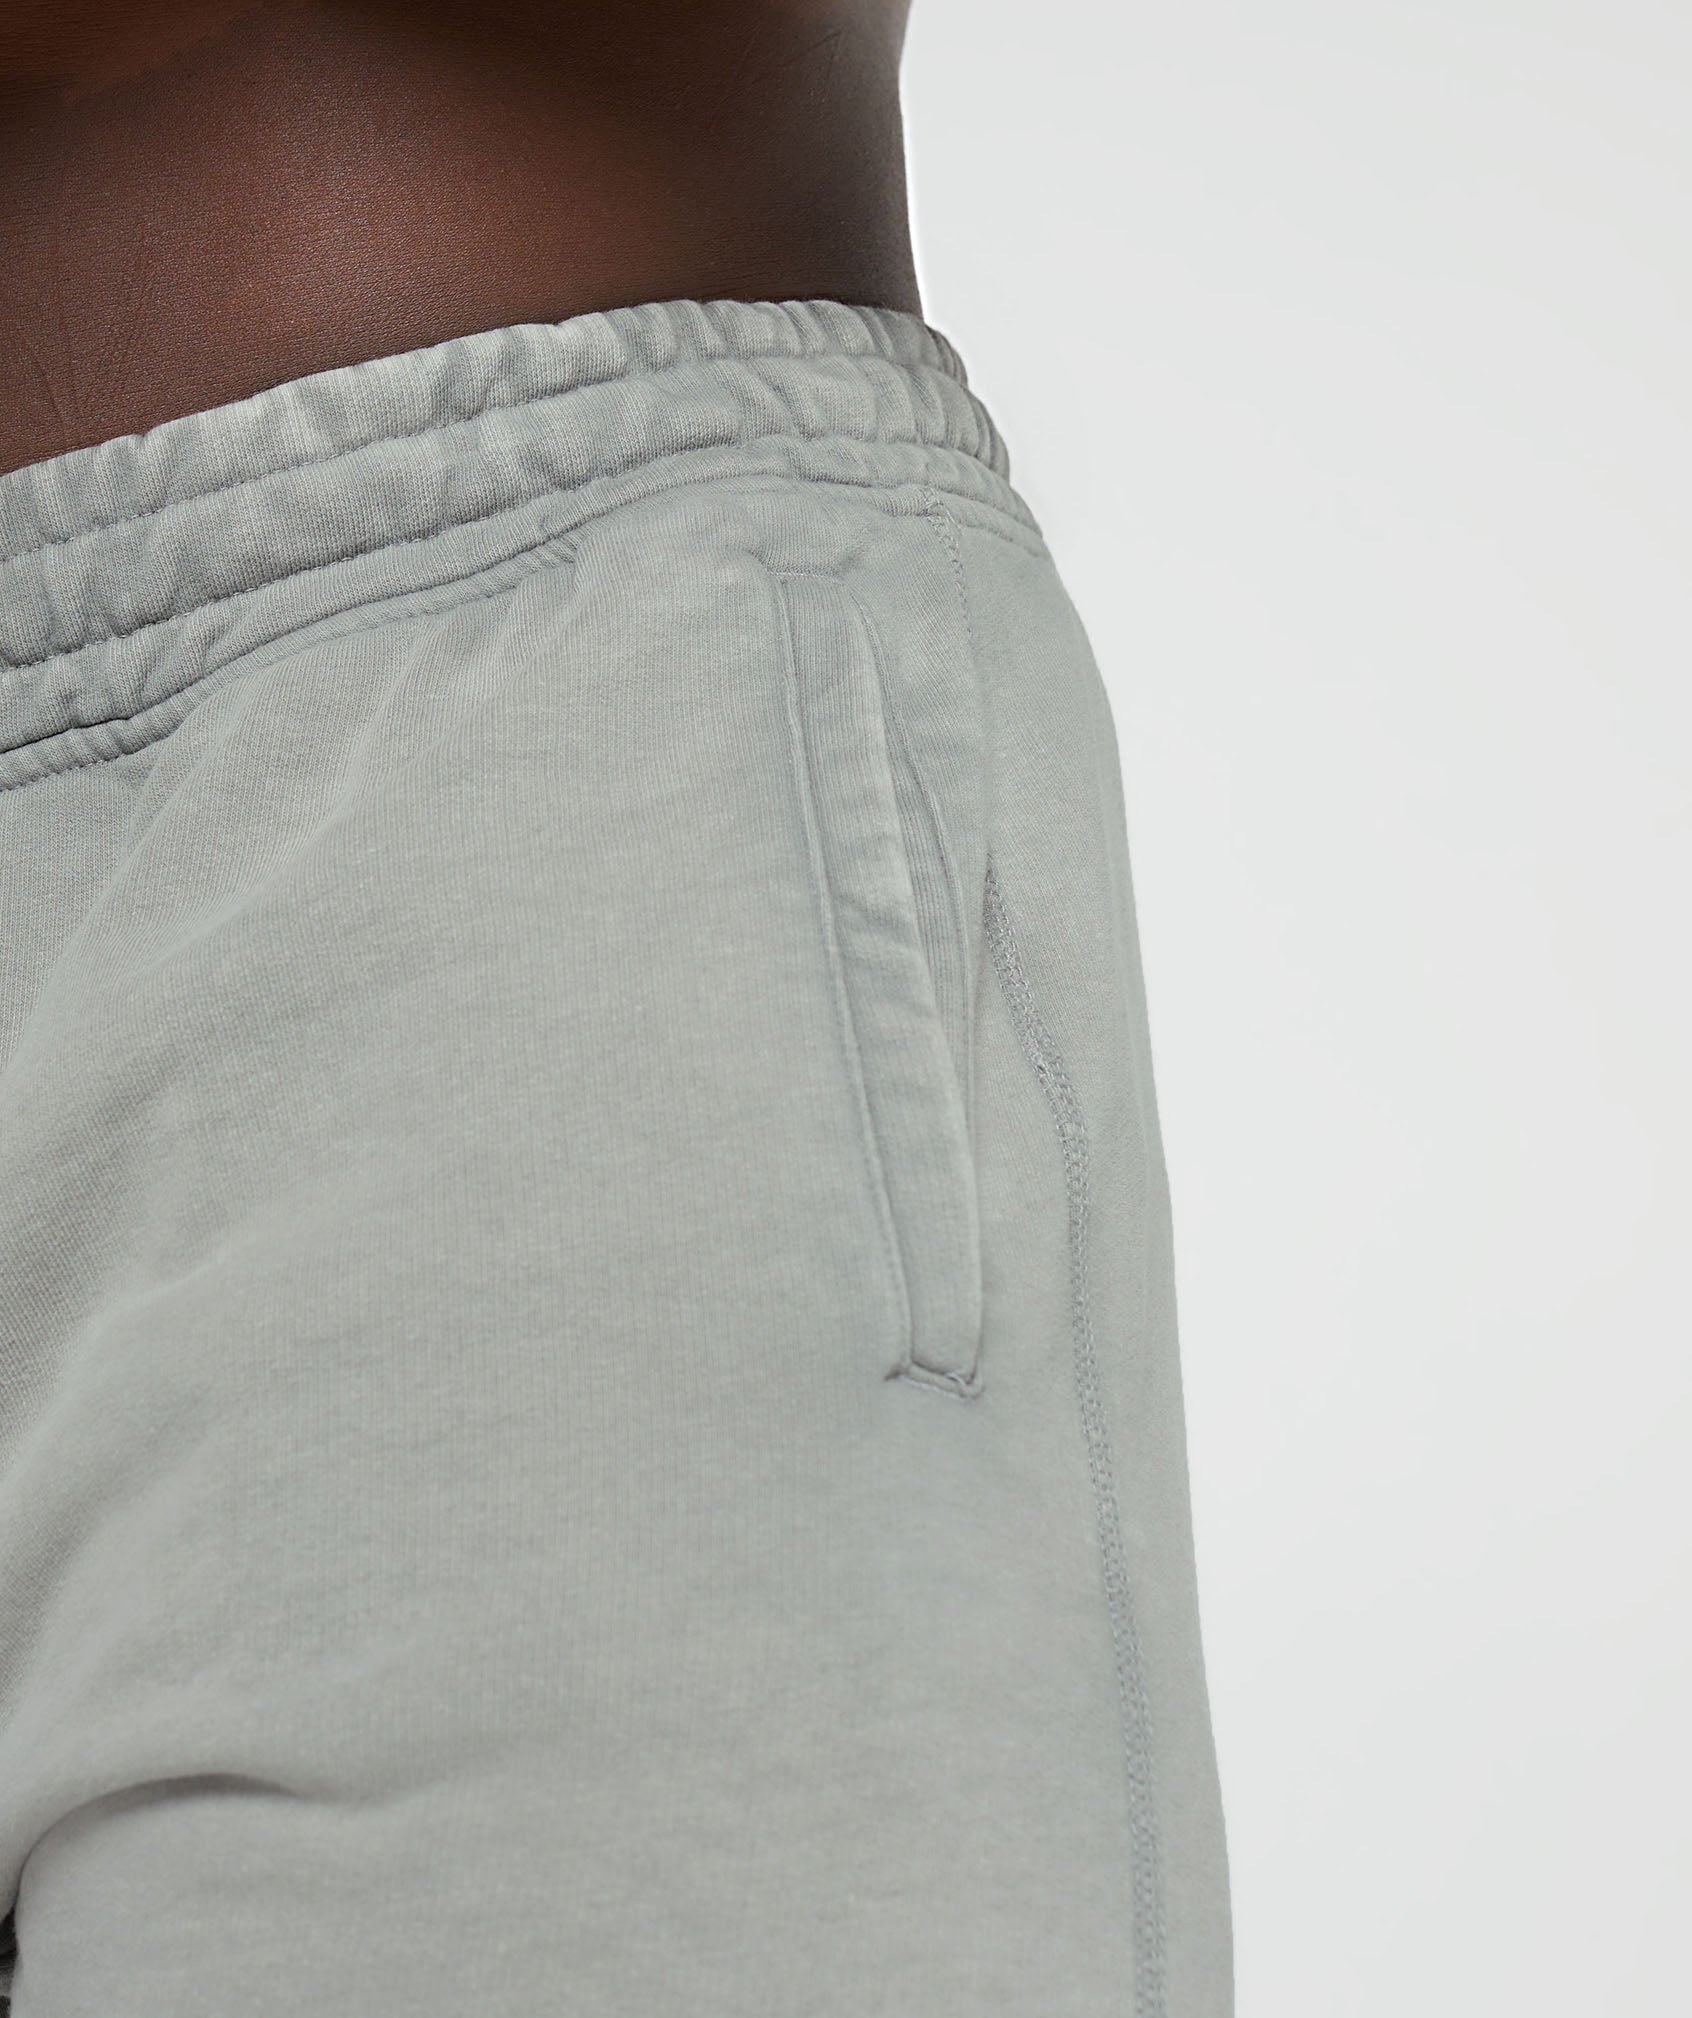 Heritage Joggers in Smokey Grey - view 5